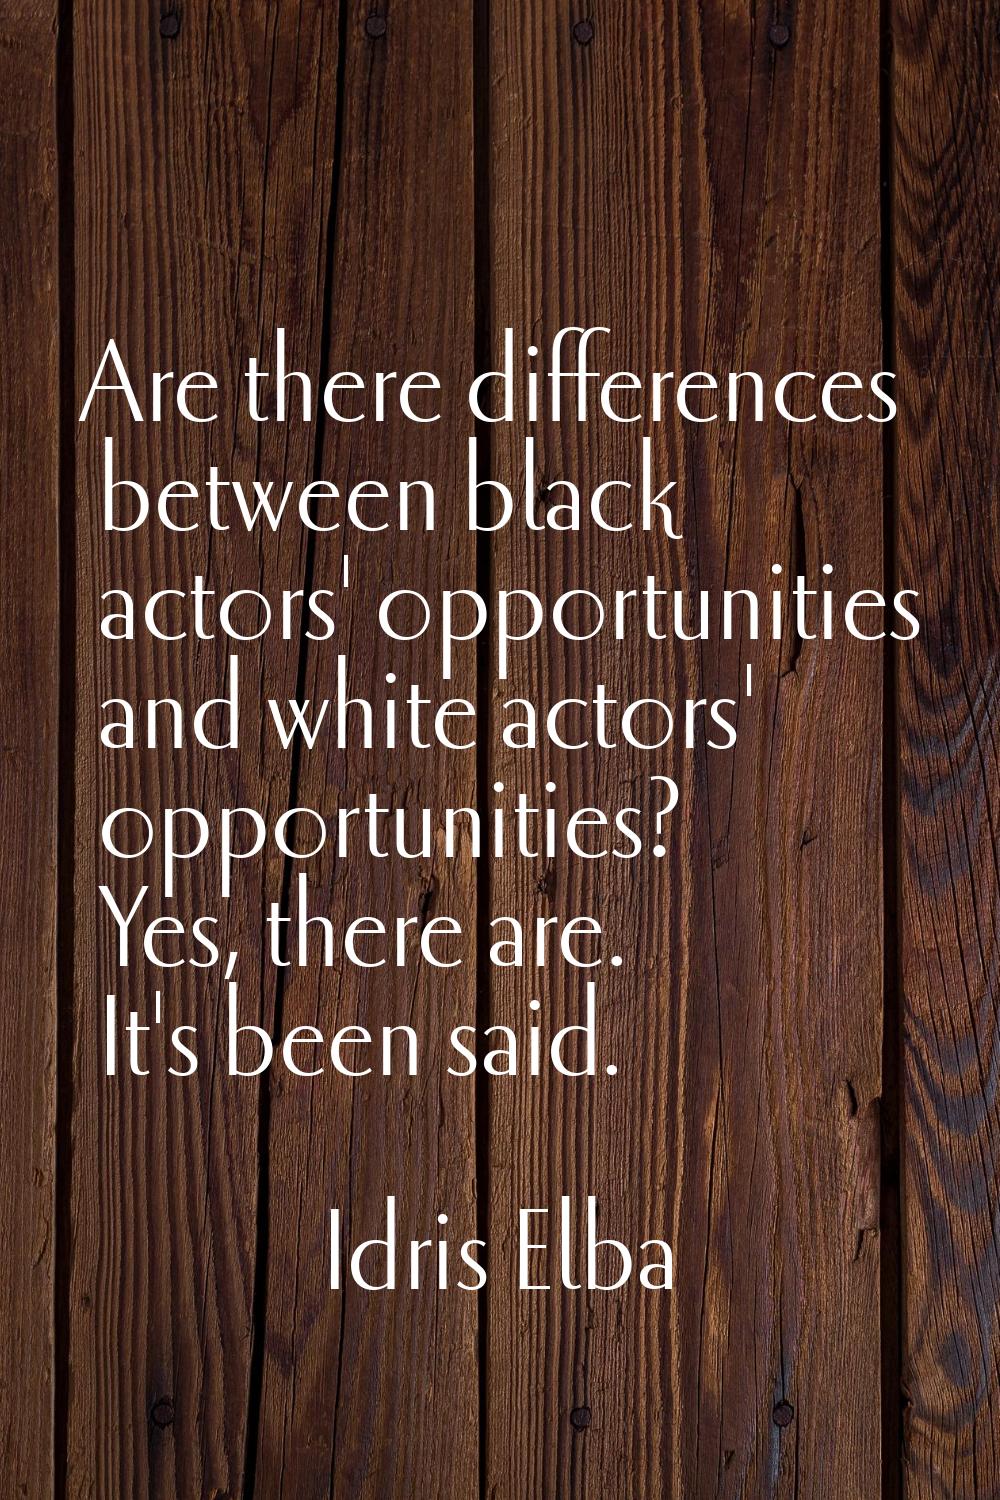 Are there differences between black actors' opportunities and white actors' opportunities? Yes, the